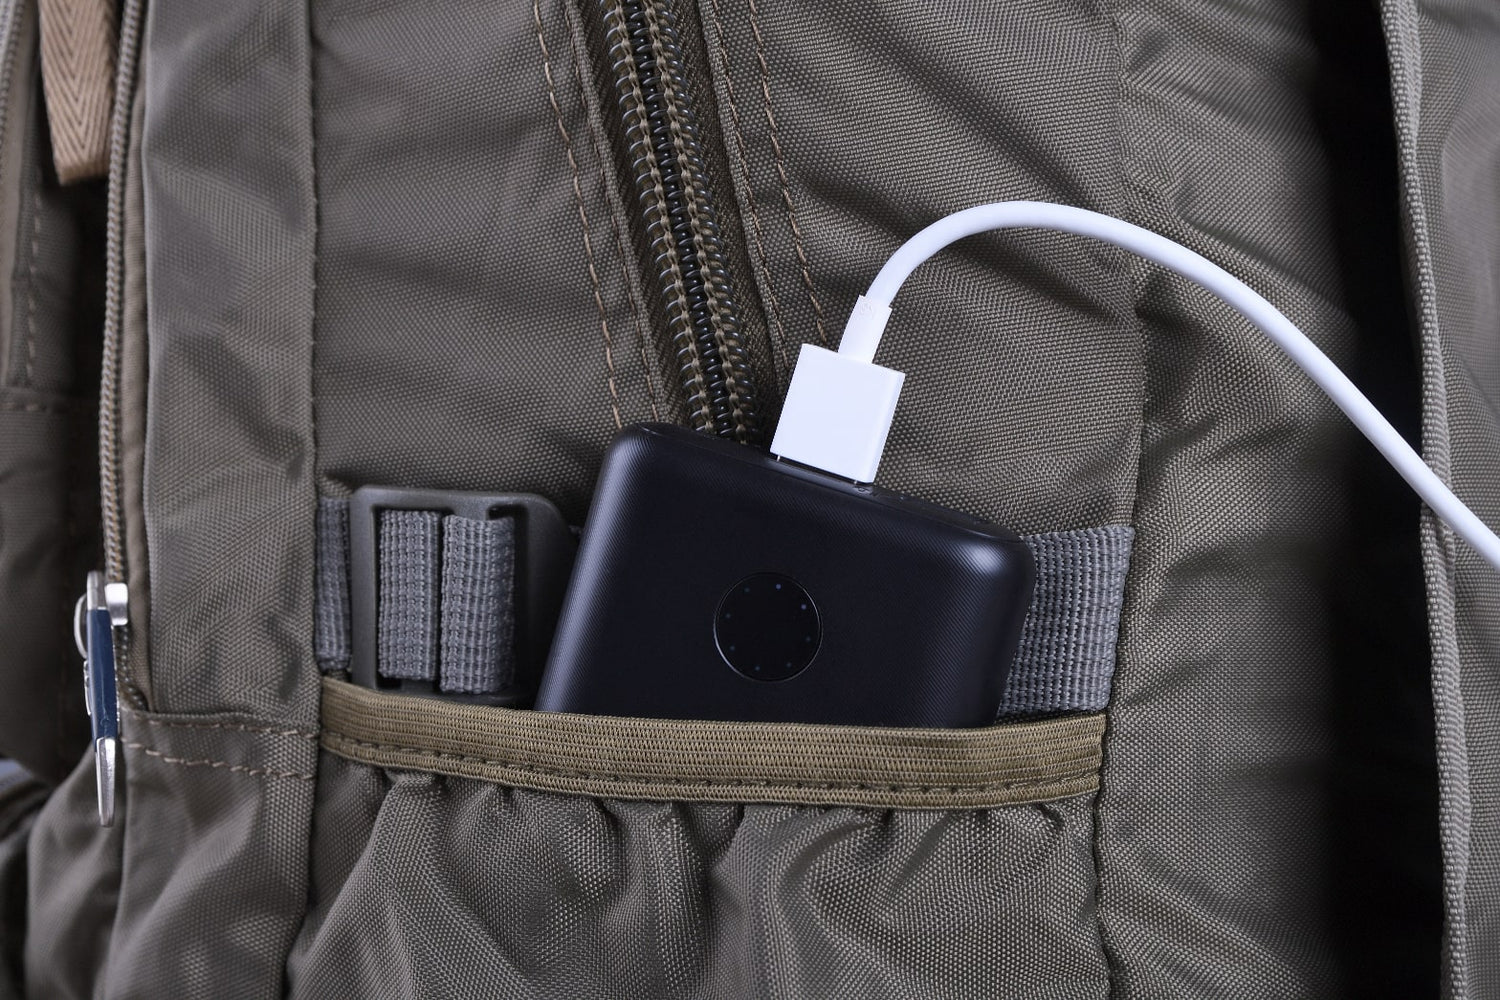 HOW TO USE A BACKPACK WITH USB PORT